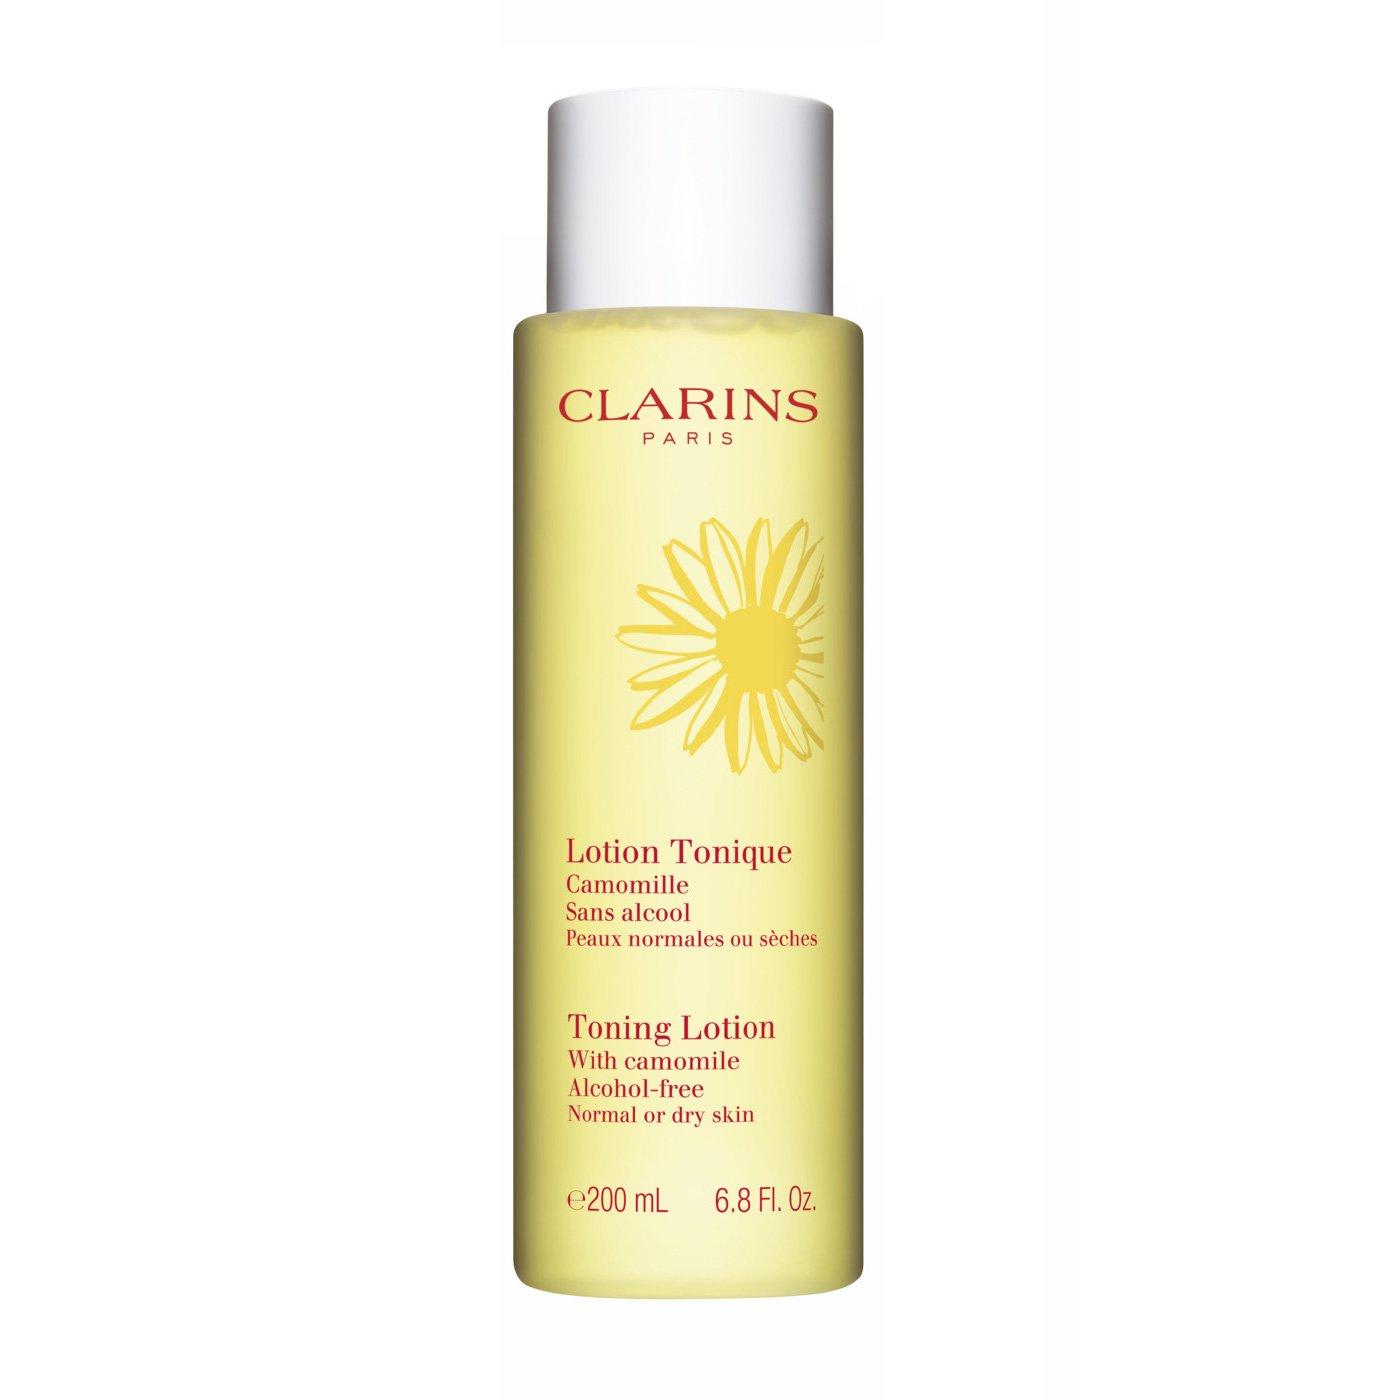 Toning Lotion with Camomile, for Dry or Normal Skin